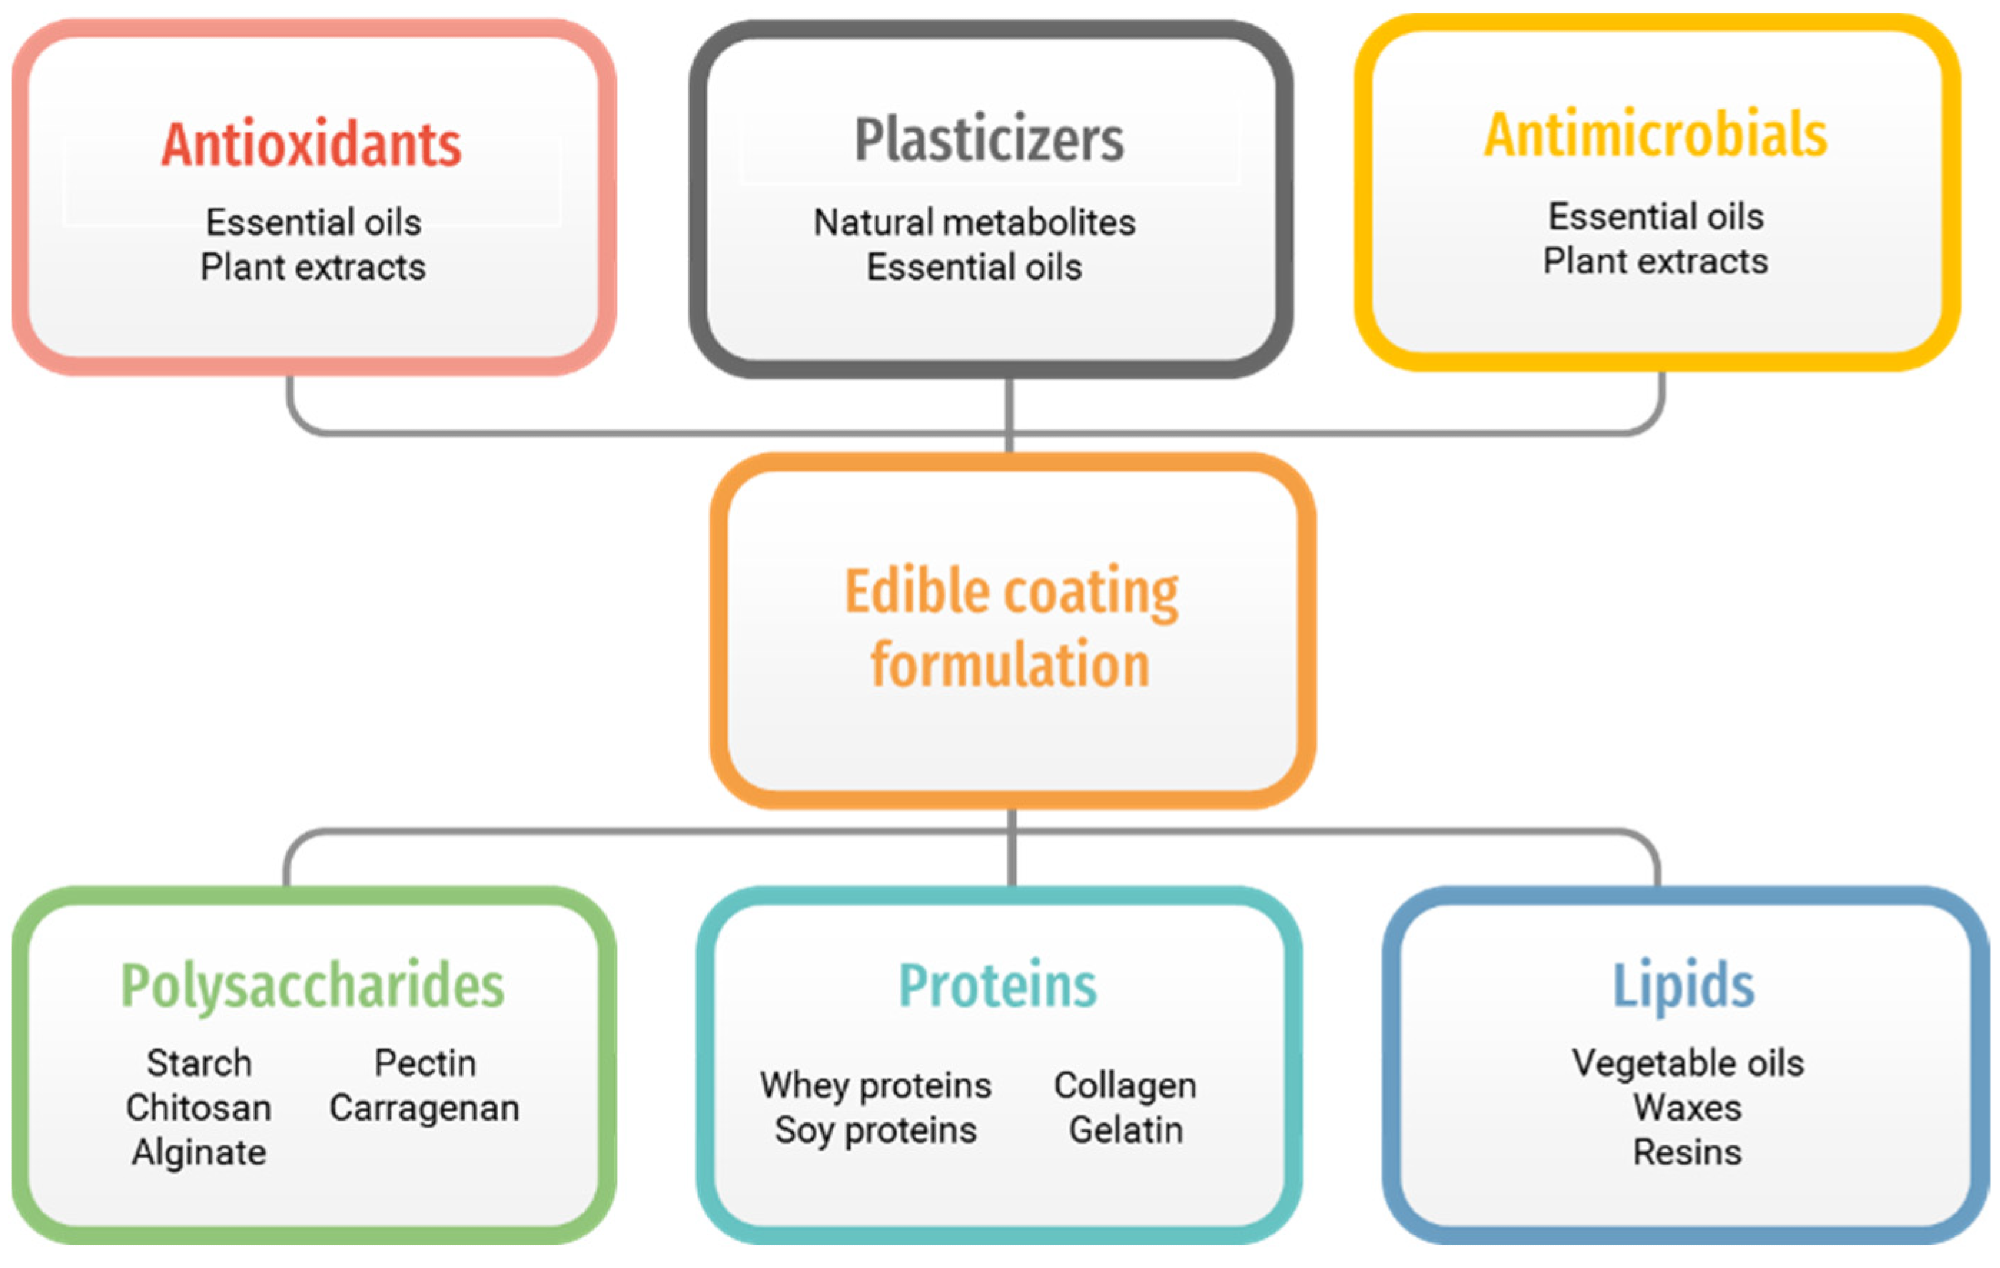 The main components of the edible coating formulations